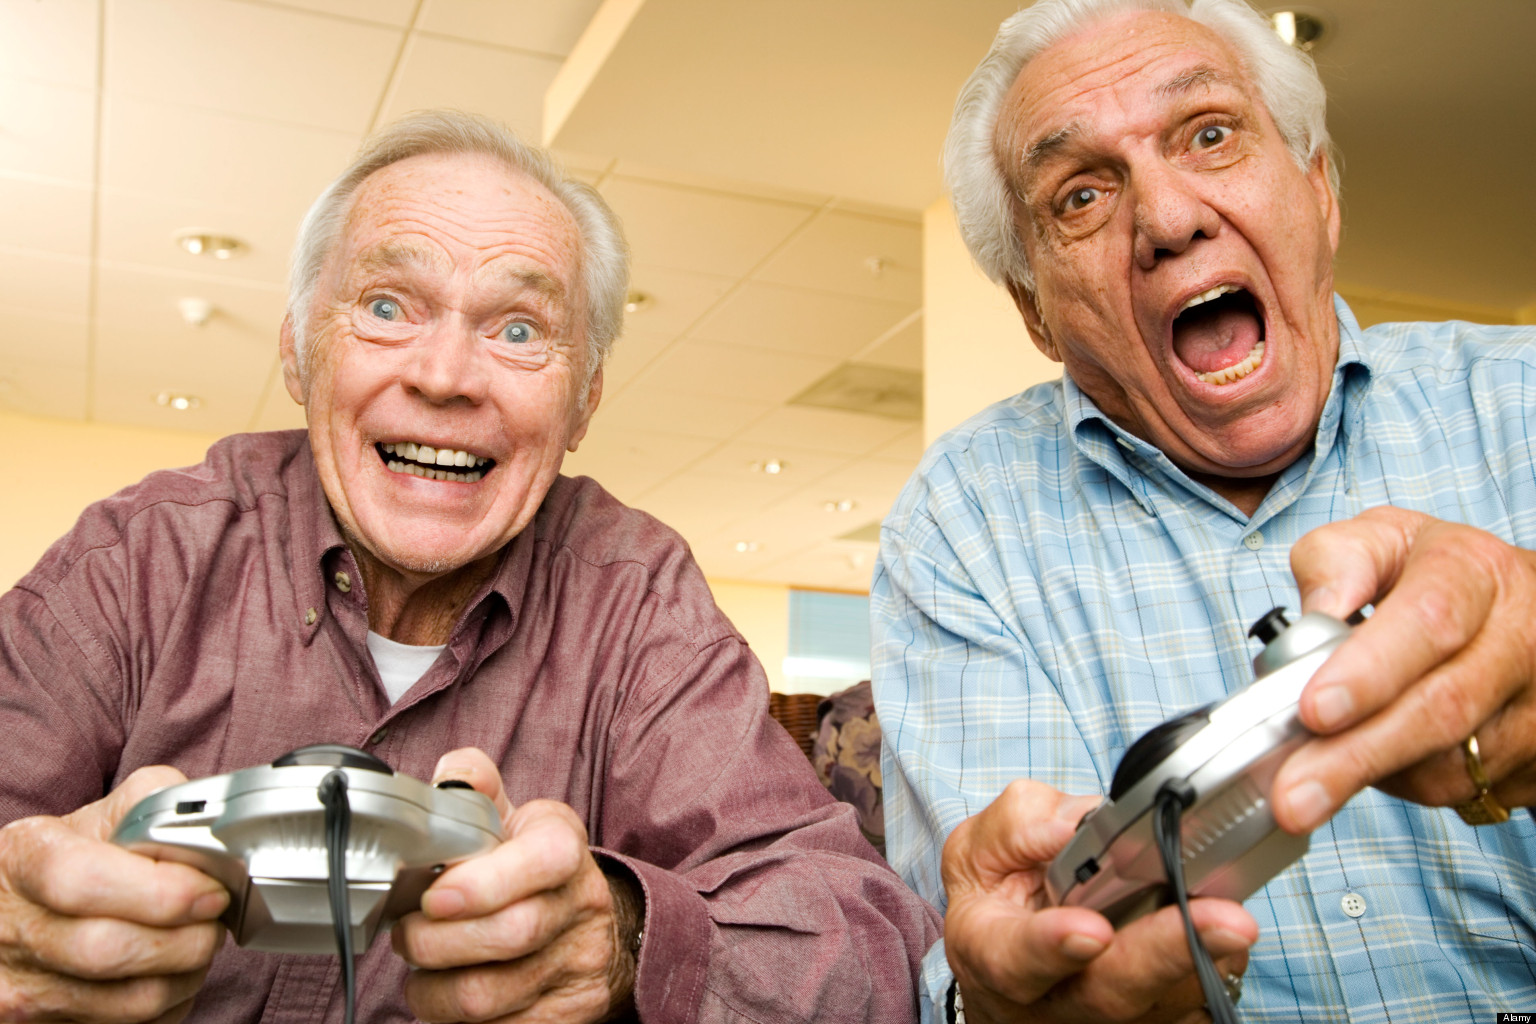 Two elderly men playing a video game